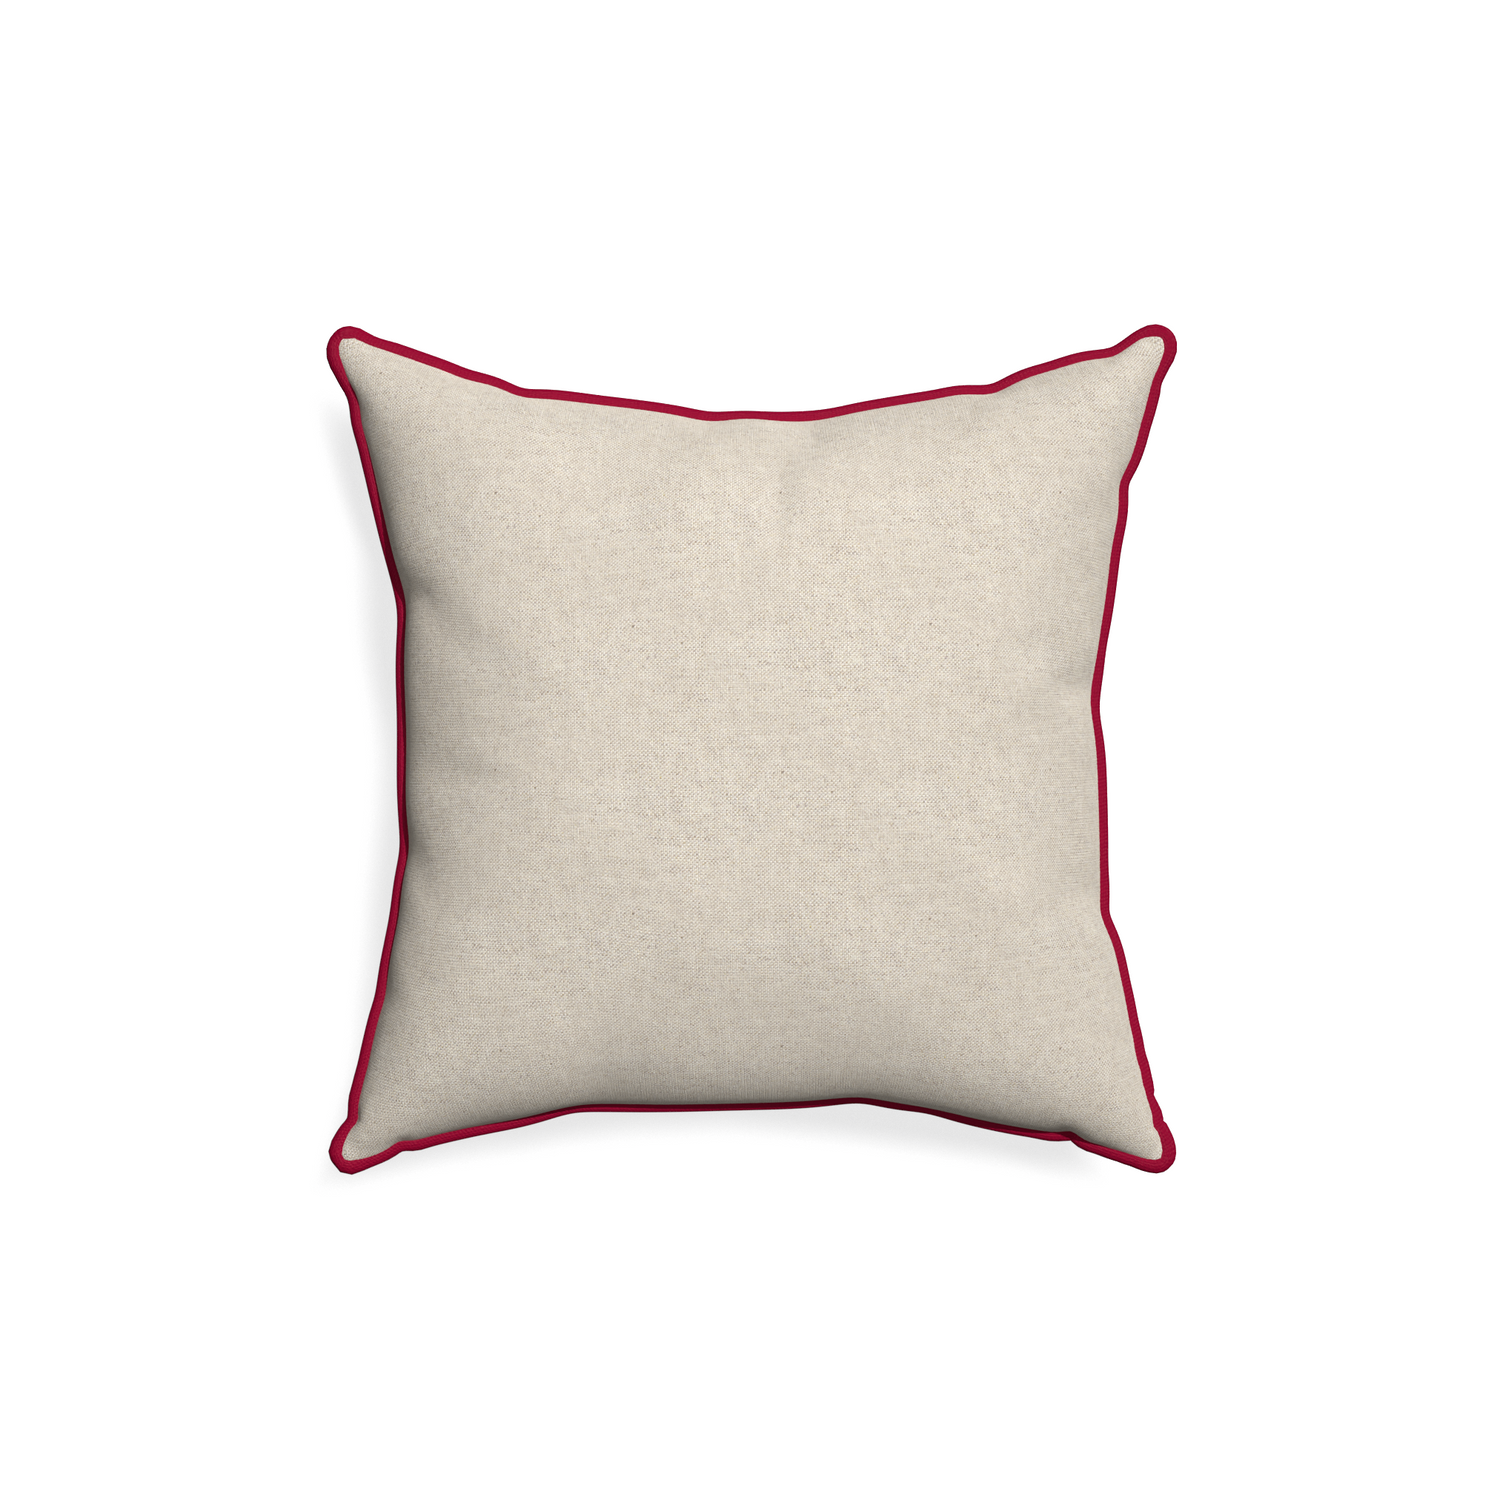 18-square oat custom pillow with raspberry piping on white background